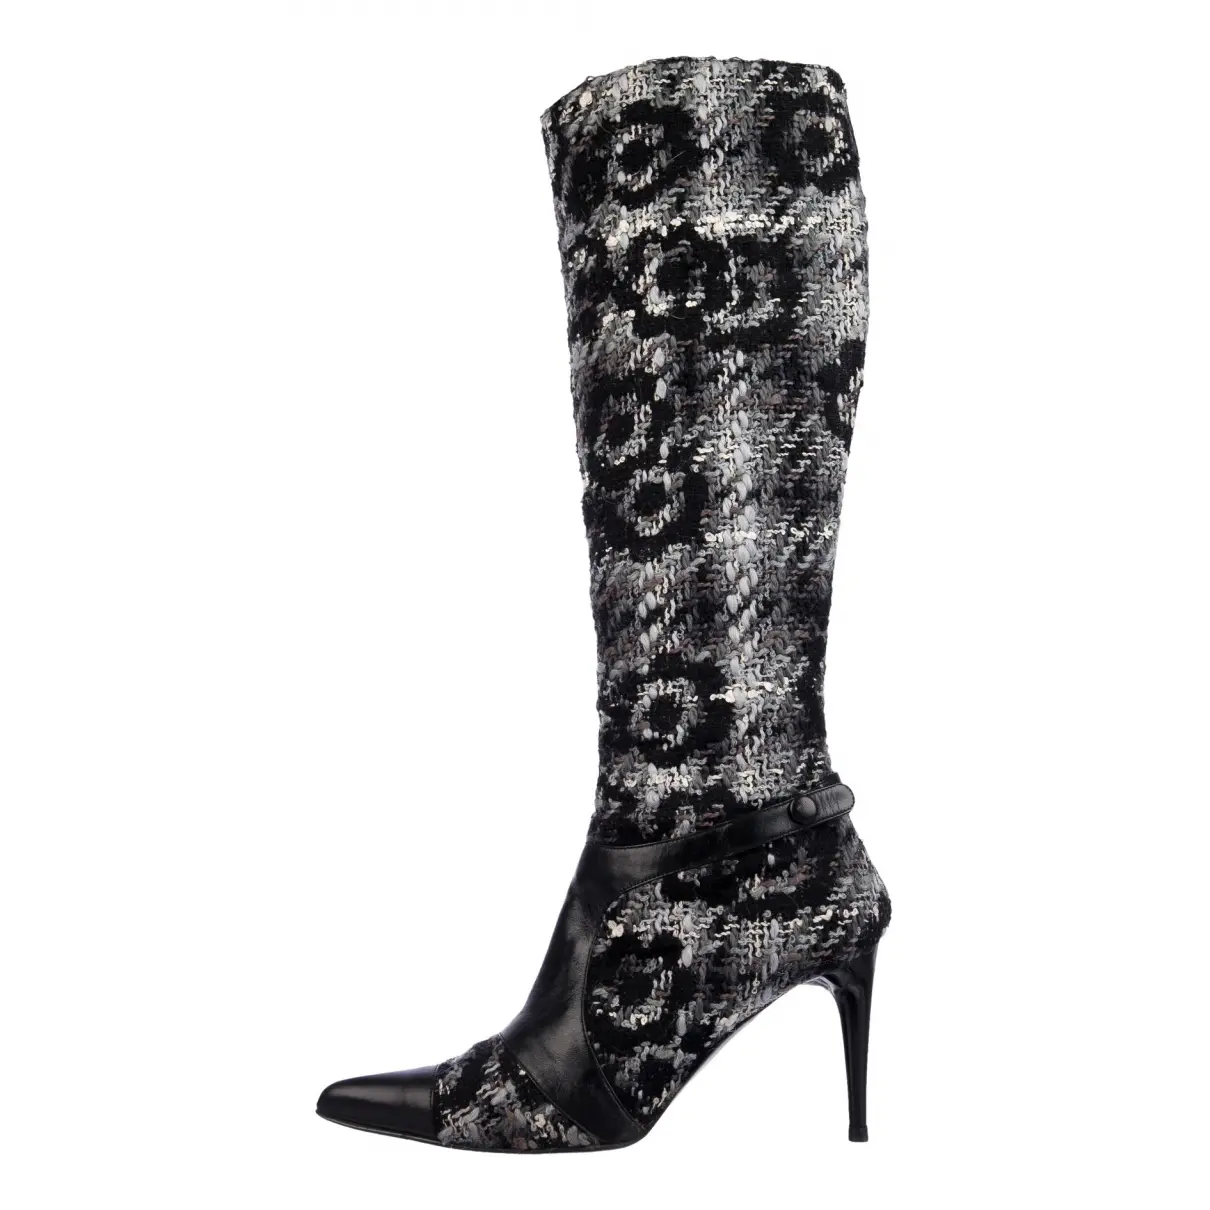 Cloth boots Chanel